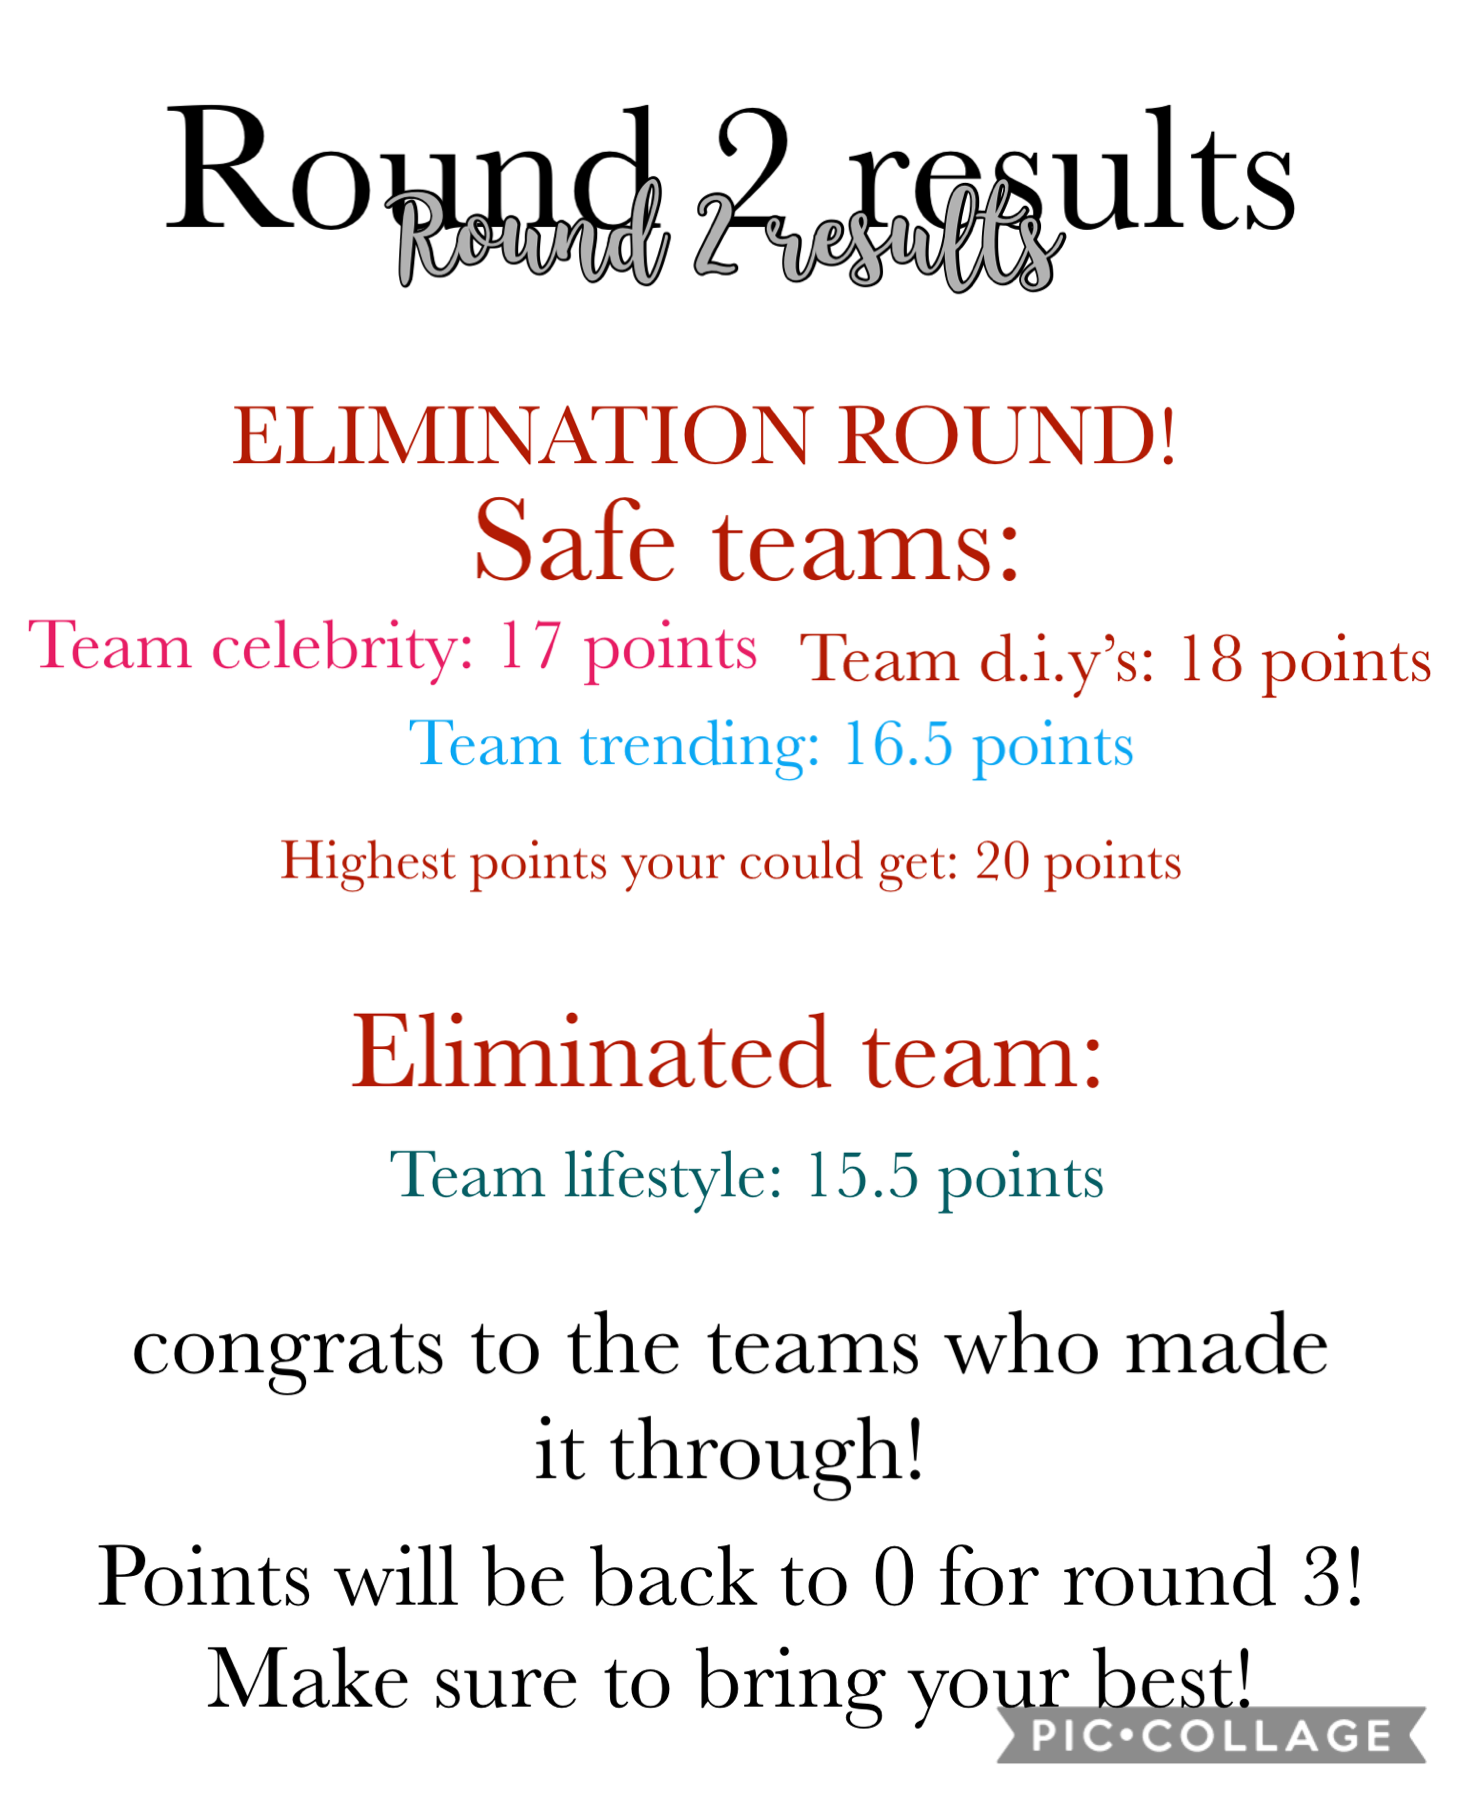 HERE ARE THE ROUND 2 RESULTS! so sorry to the eliminated team 😭 it was soo hard aughhhhhh 😂❤️❤️❤️ anyway round 3 will be up soon! ❤️❤️❤️💕💕 have a great day everyone 😘😘